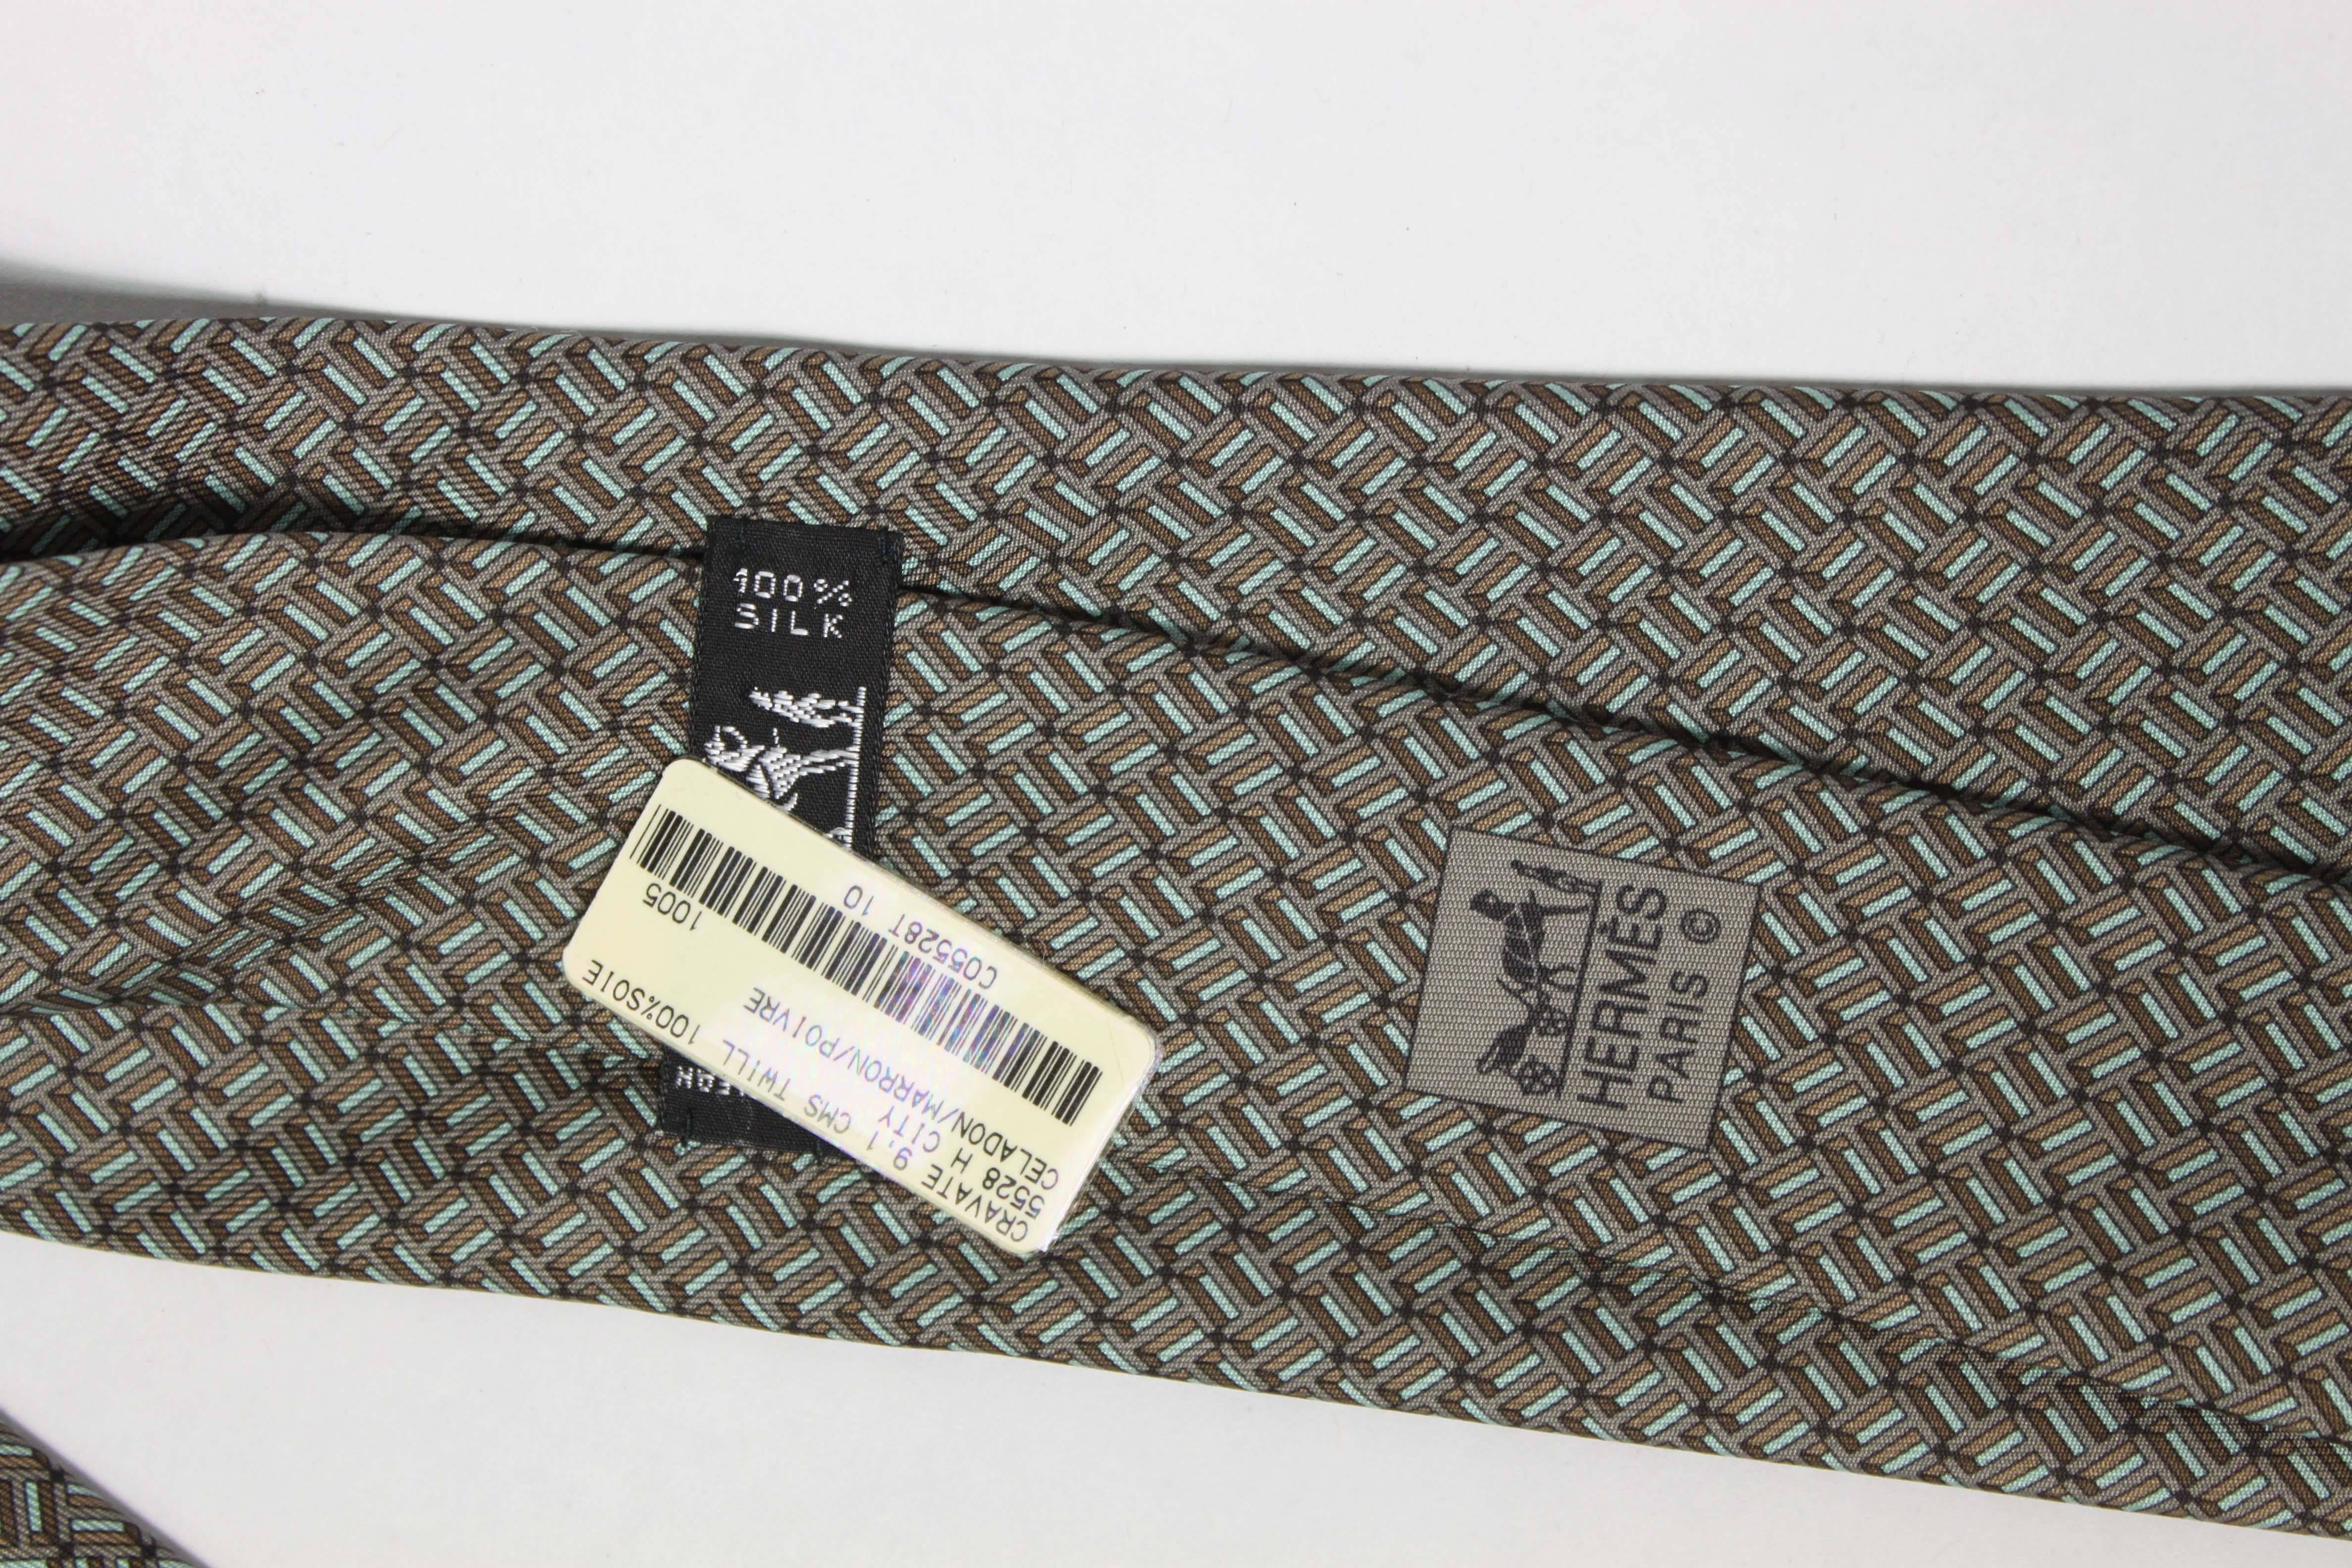 Hermès silk tie in tones of grey and green. Includes original tag, never worn, packaging not included.